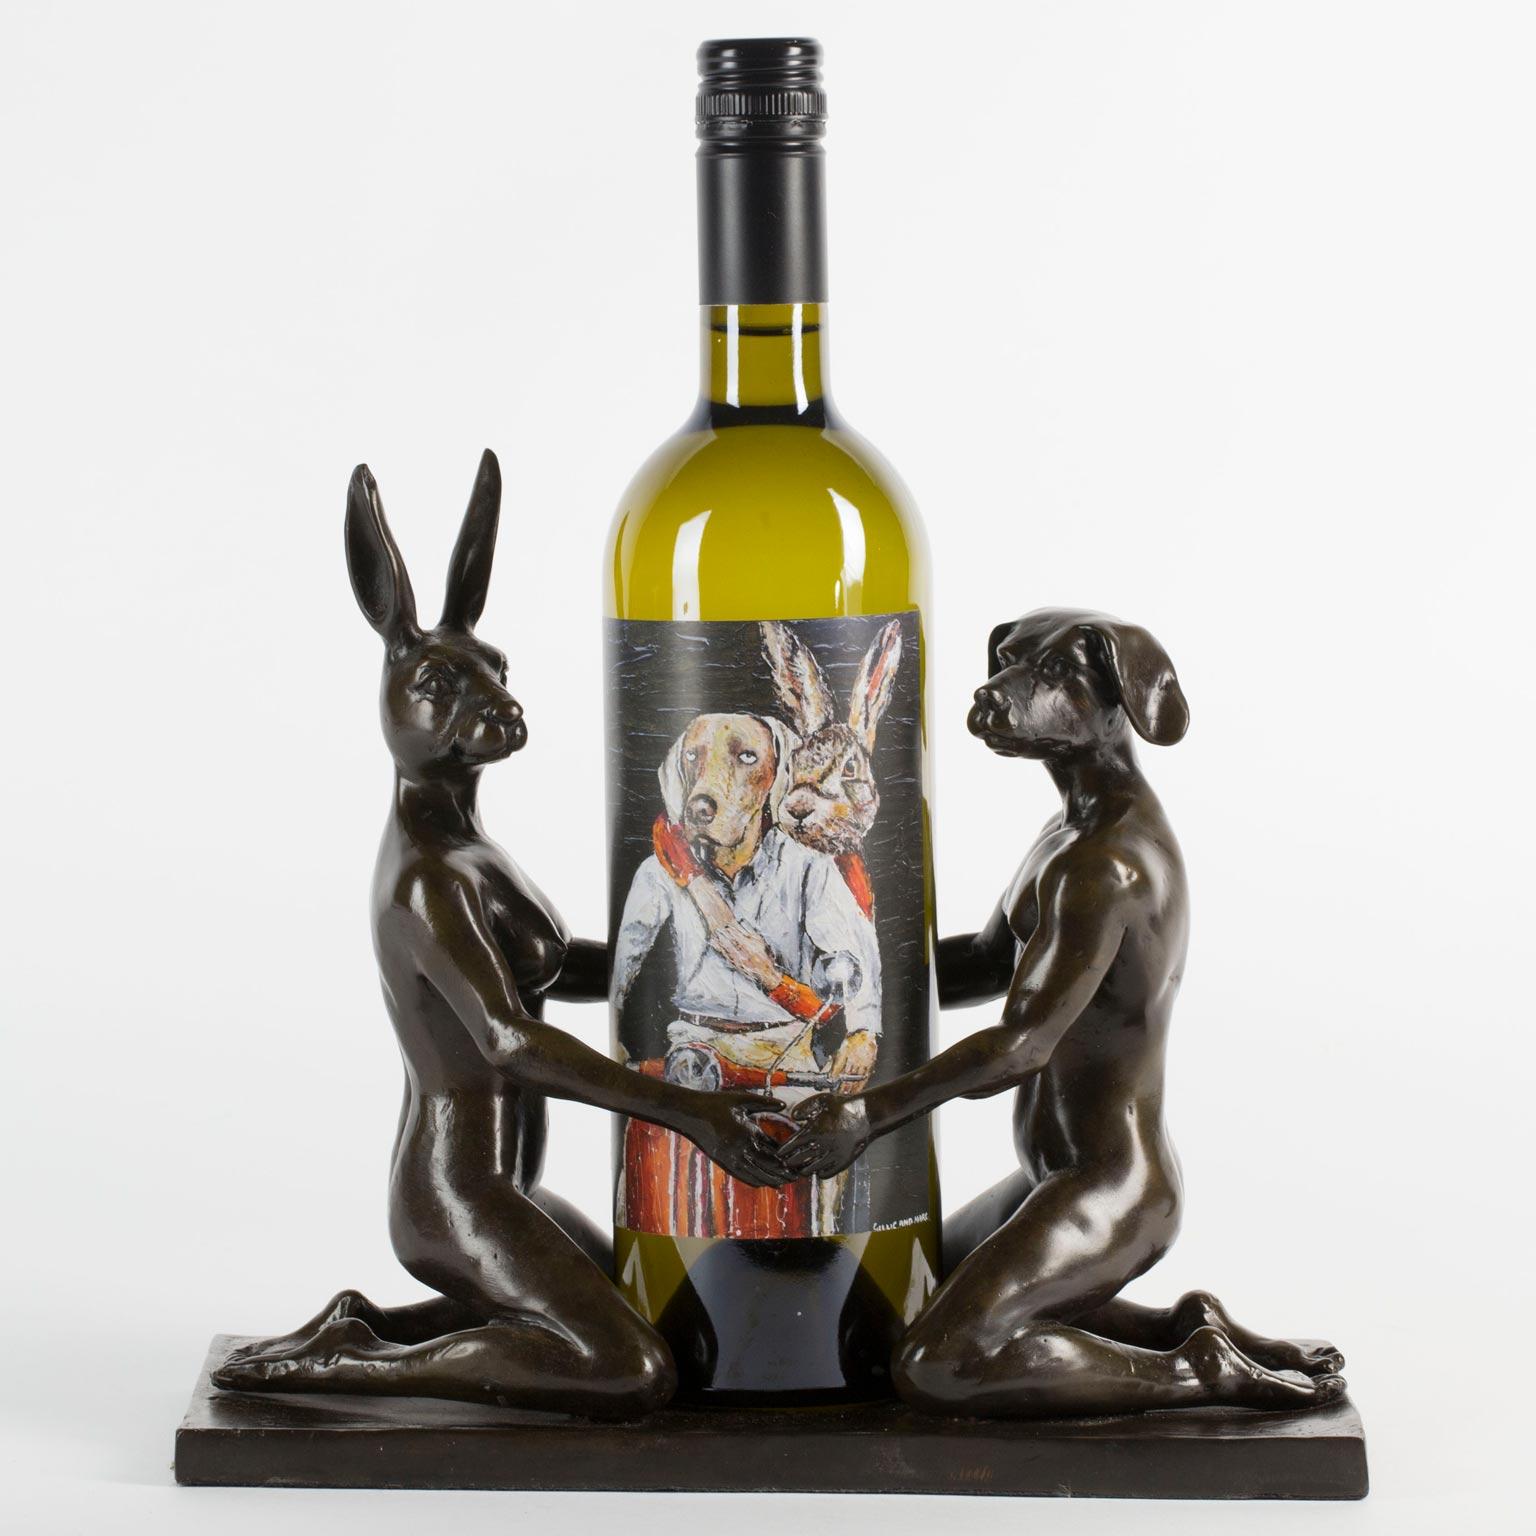 Authentic Limited Edition Bronze Animal Wine Holder Sculpture, Gillie and Marc - Art by Gillie and Marc Schattner